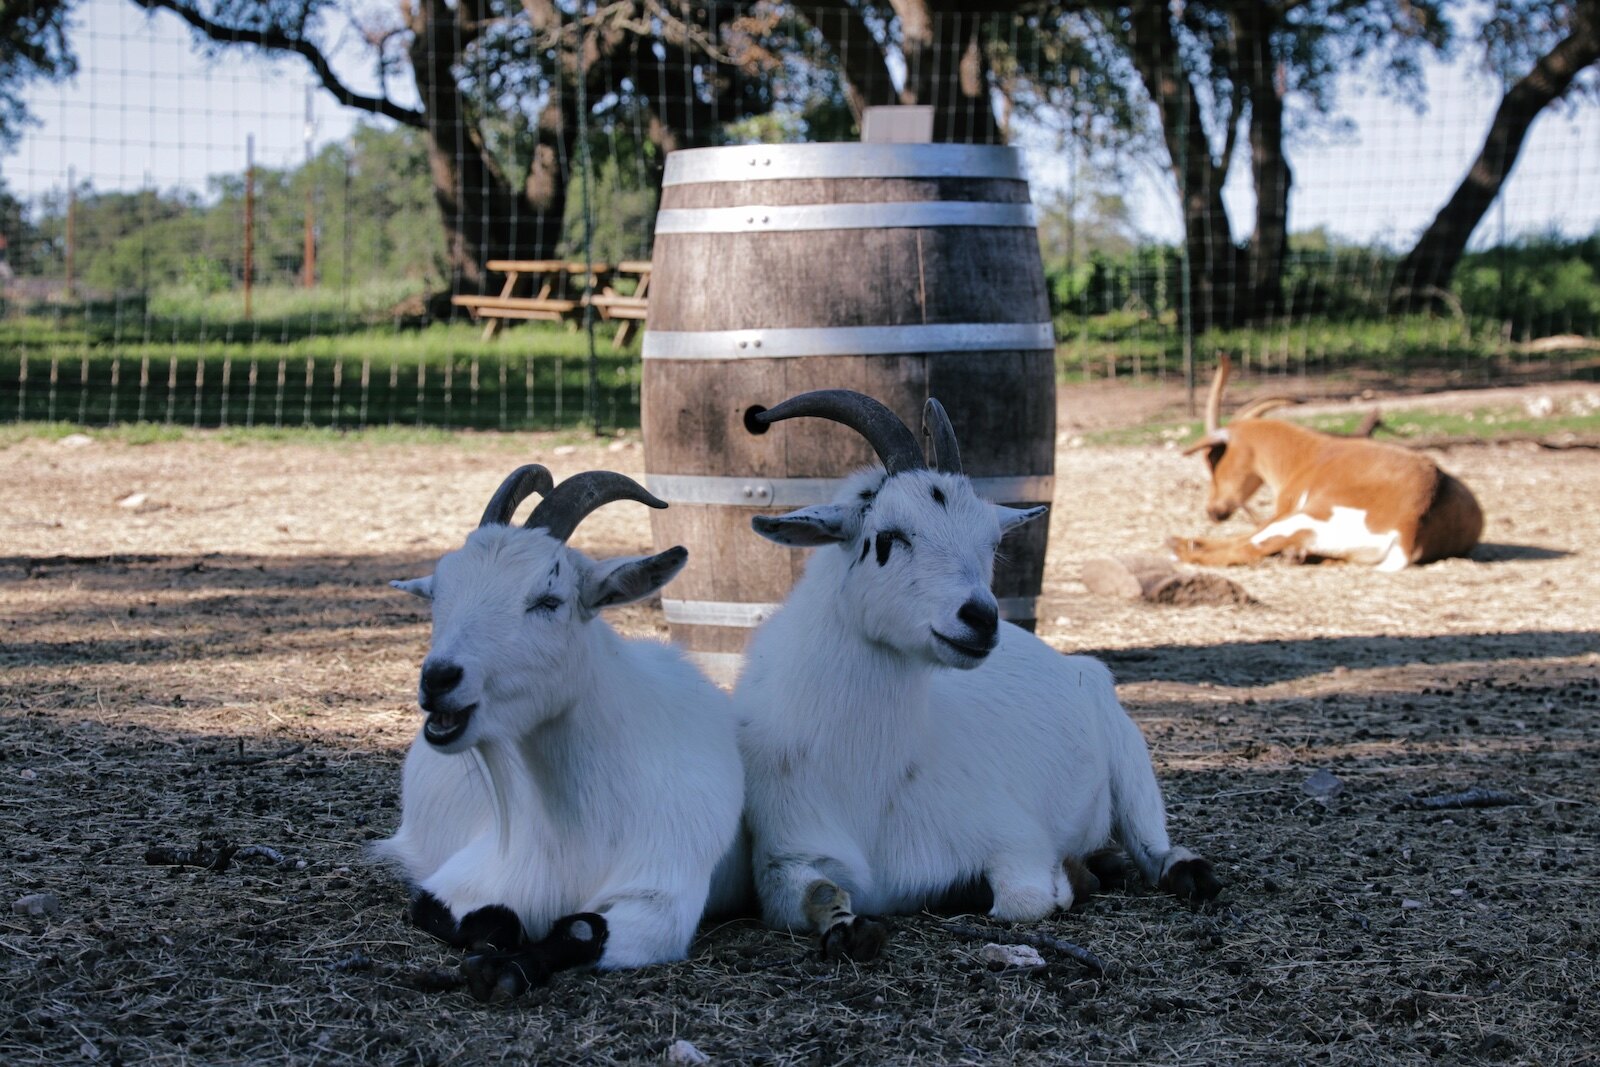 Goats at Jester King farm